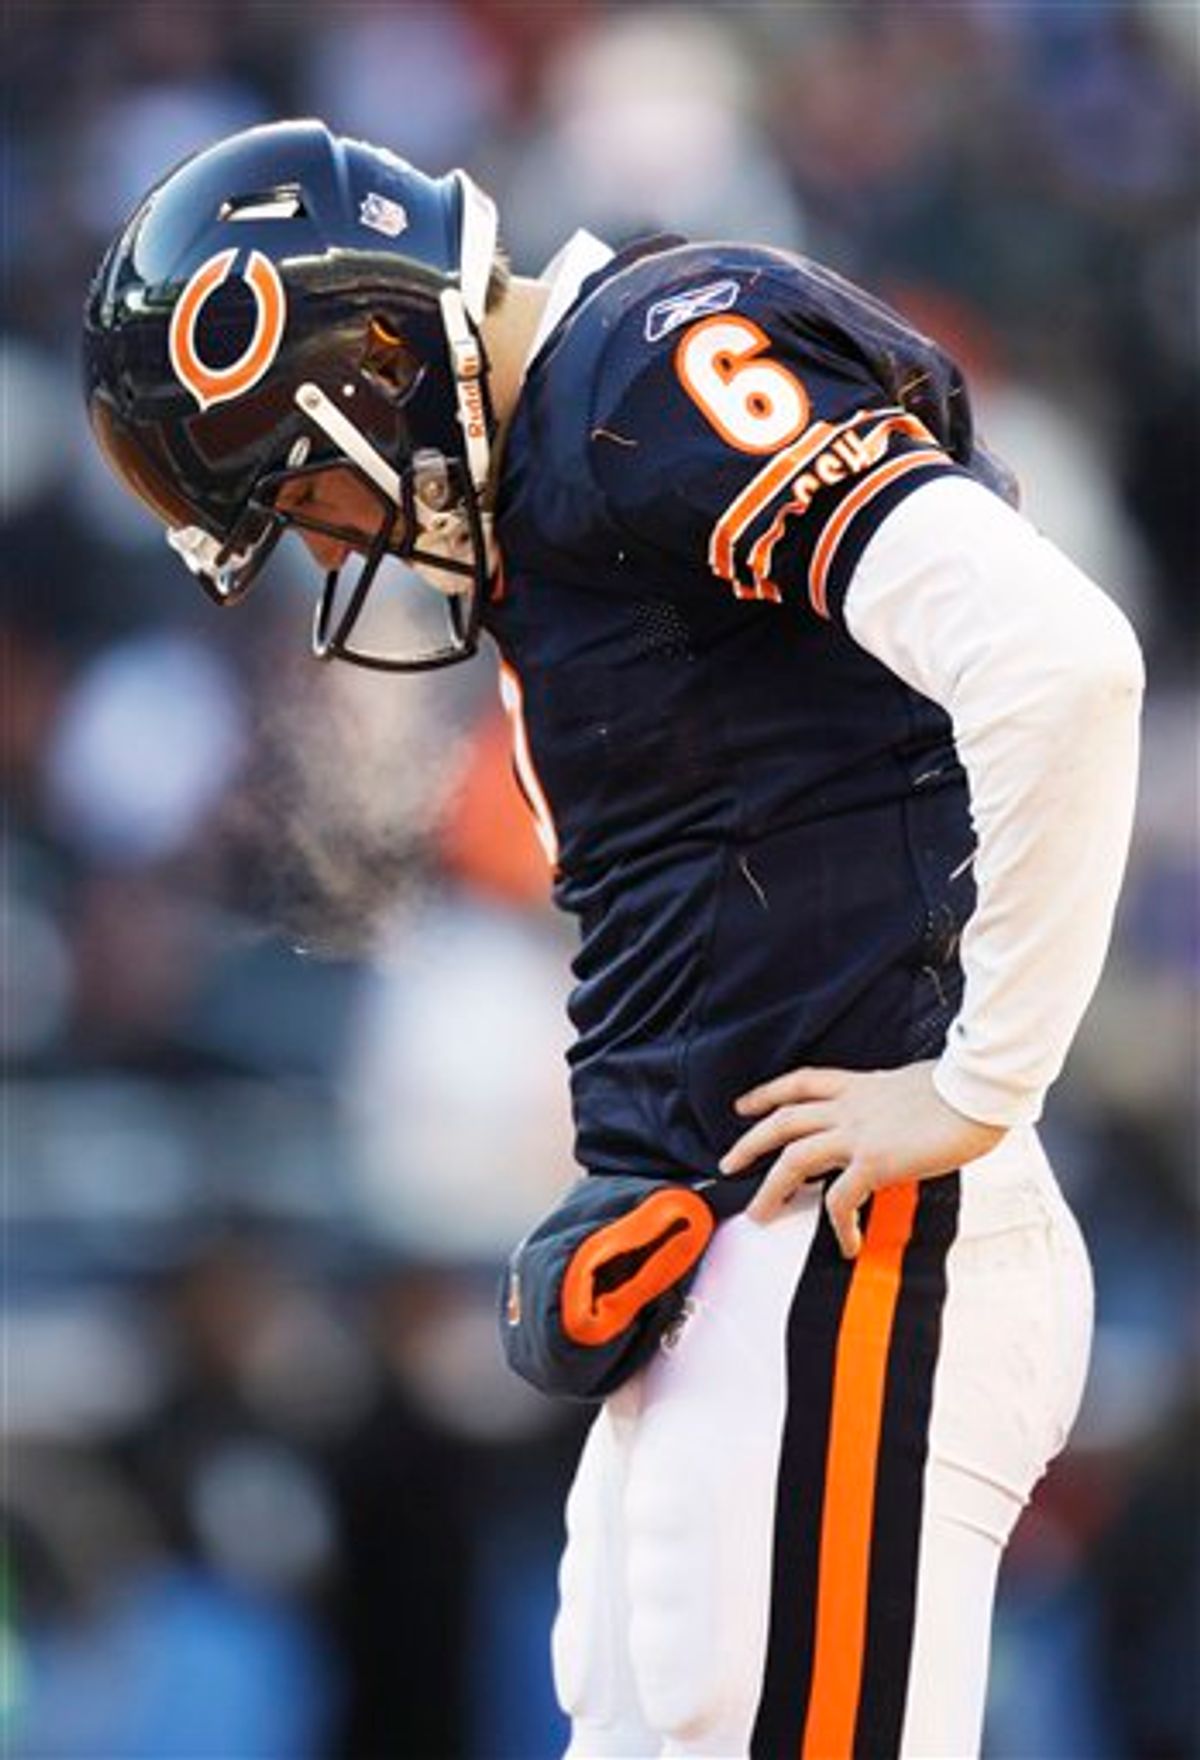 Chicago Bears quarterback Jay Cutler looks down after being hit while throwing a pass during the first half of the NFC Championship NFL football game against the Green Bay Packers Sunday, Jan. 23, 2011, in Chicago. (AP Photo/Nam Y. Huh) (AP)